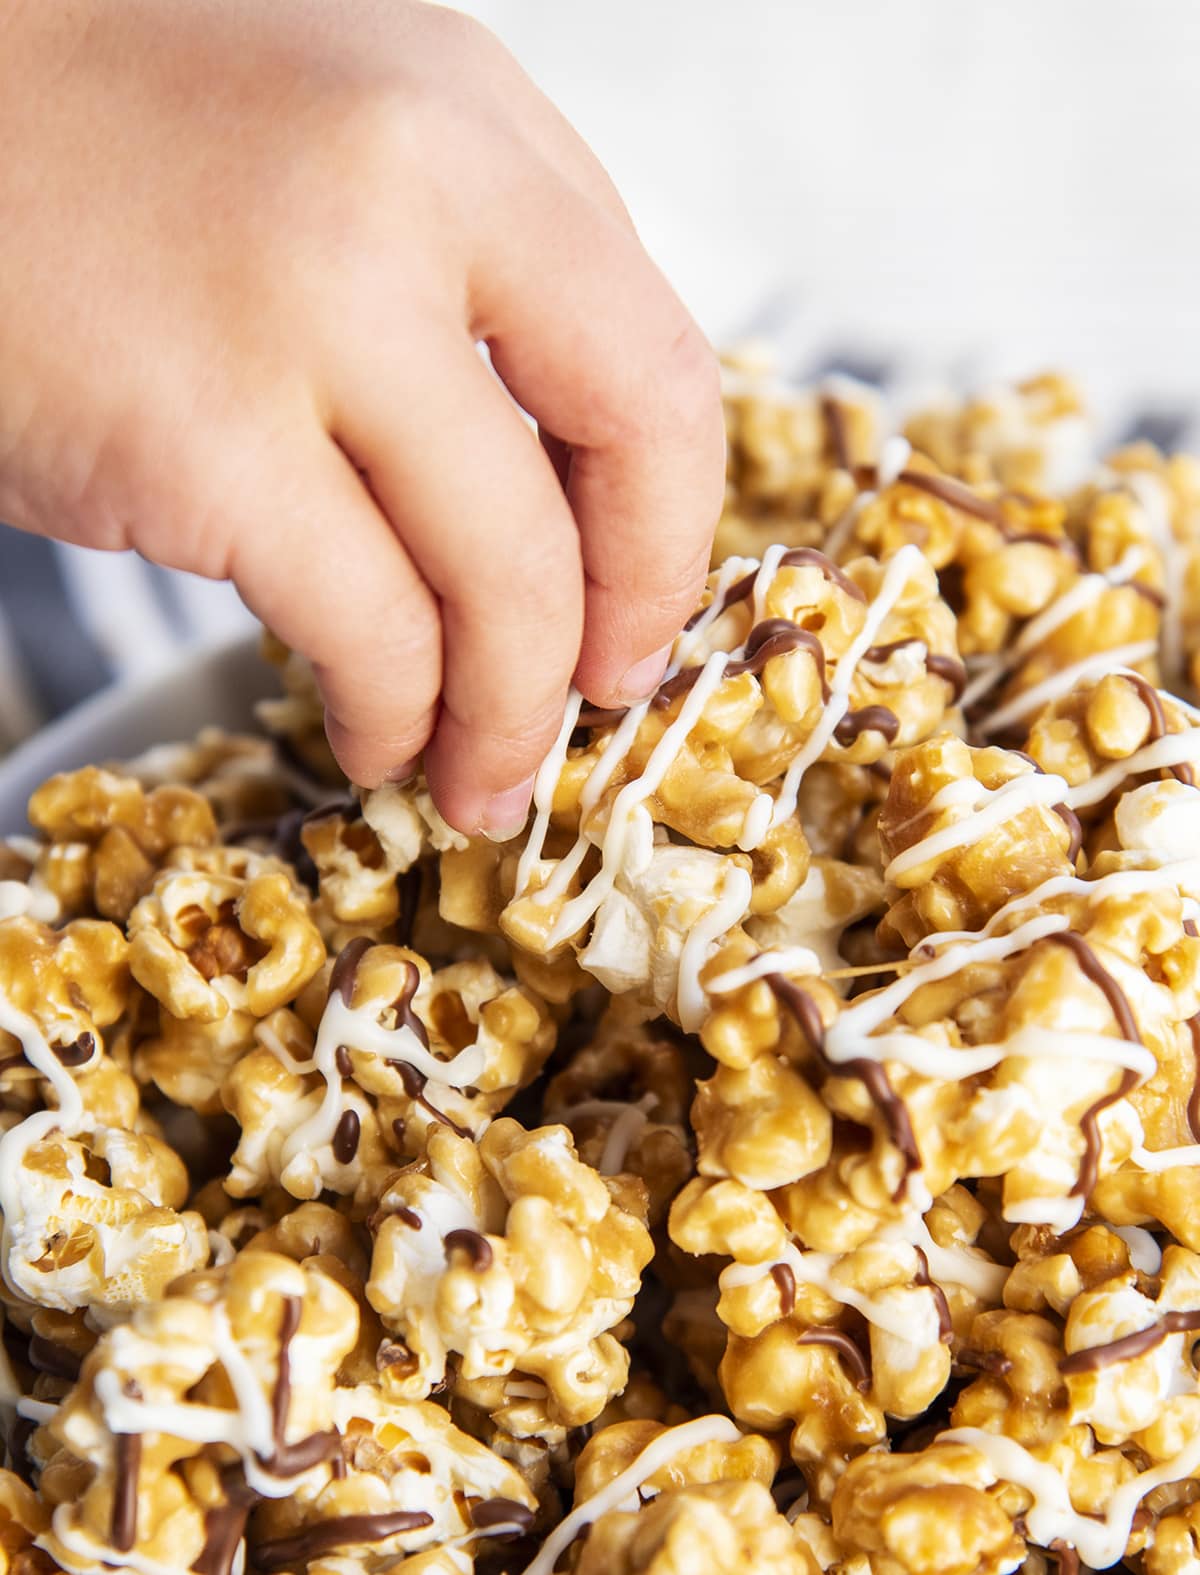 A hand grabbing a piece of caramel popcorn out of a bowl.